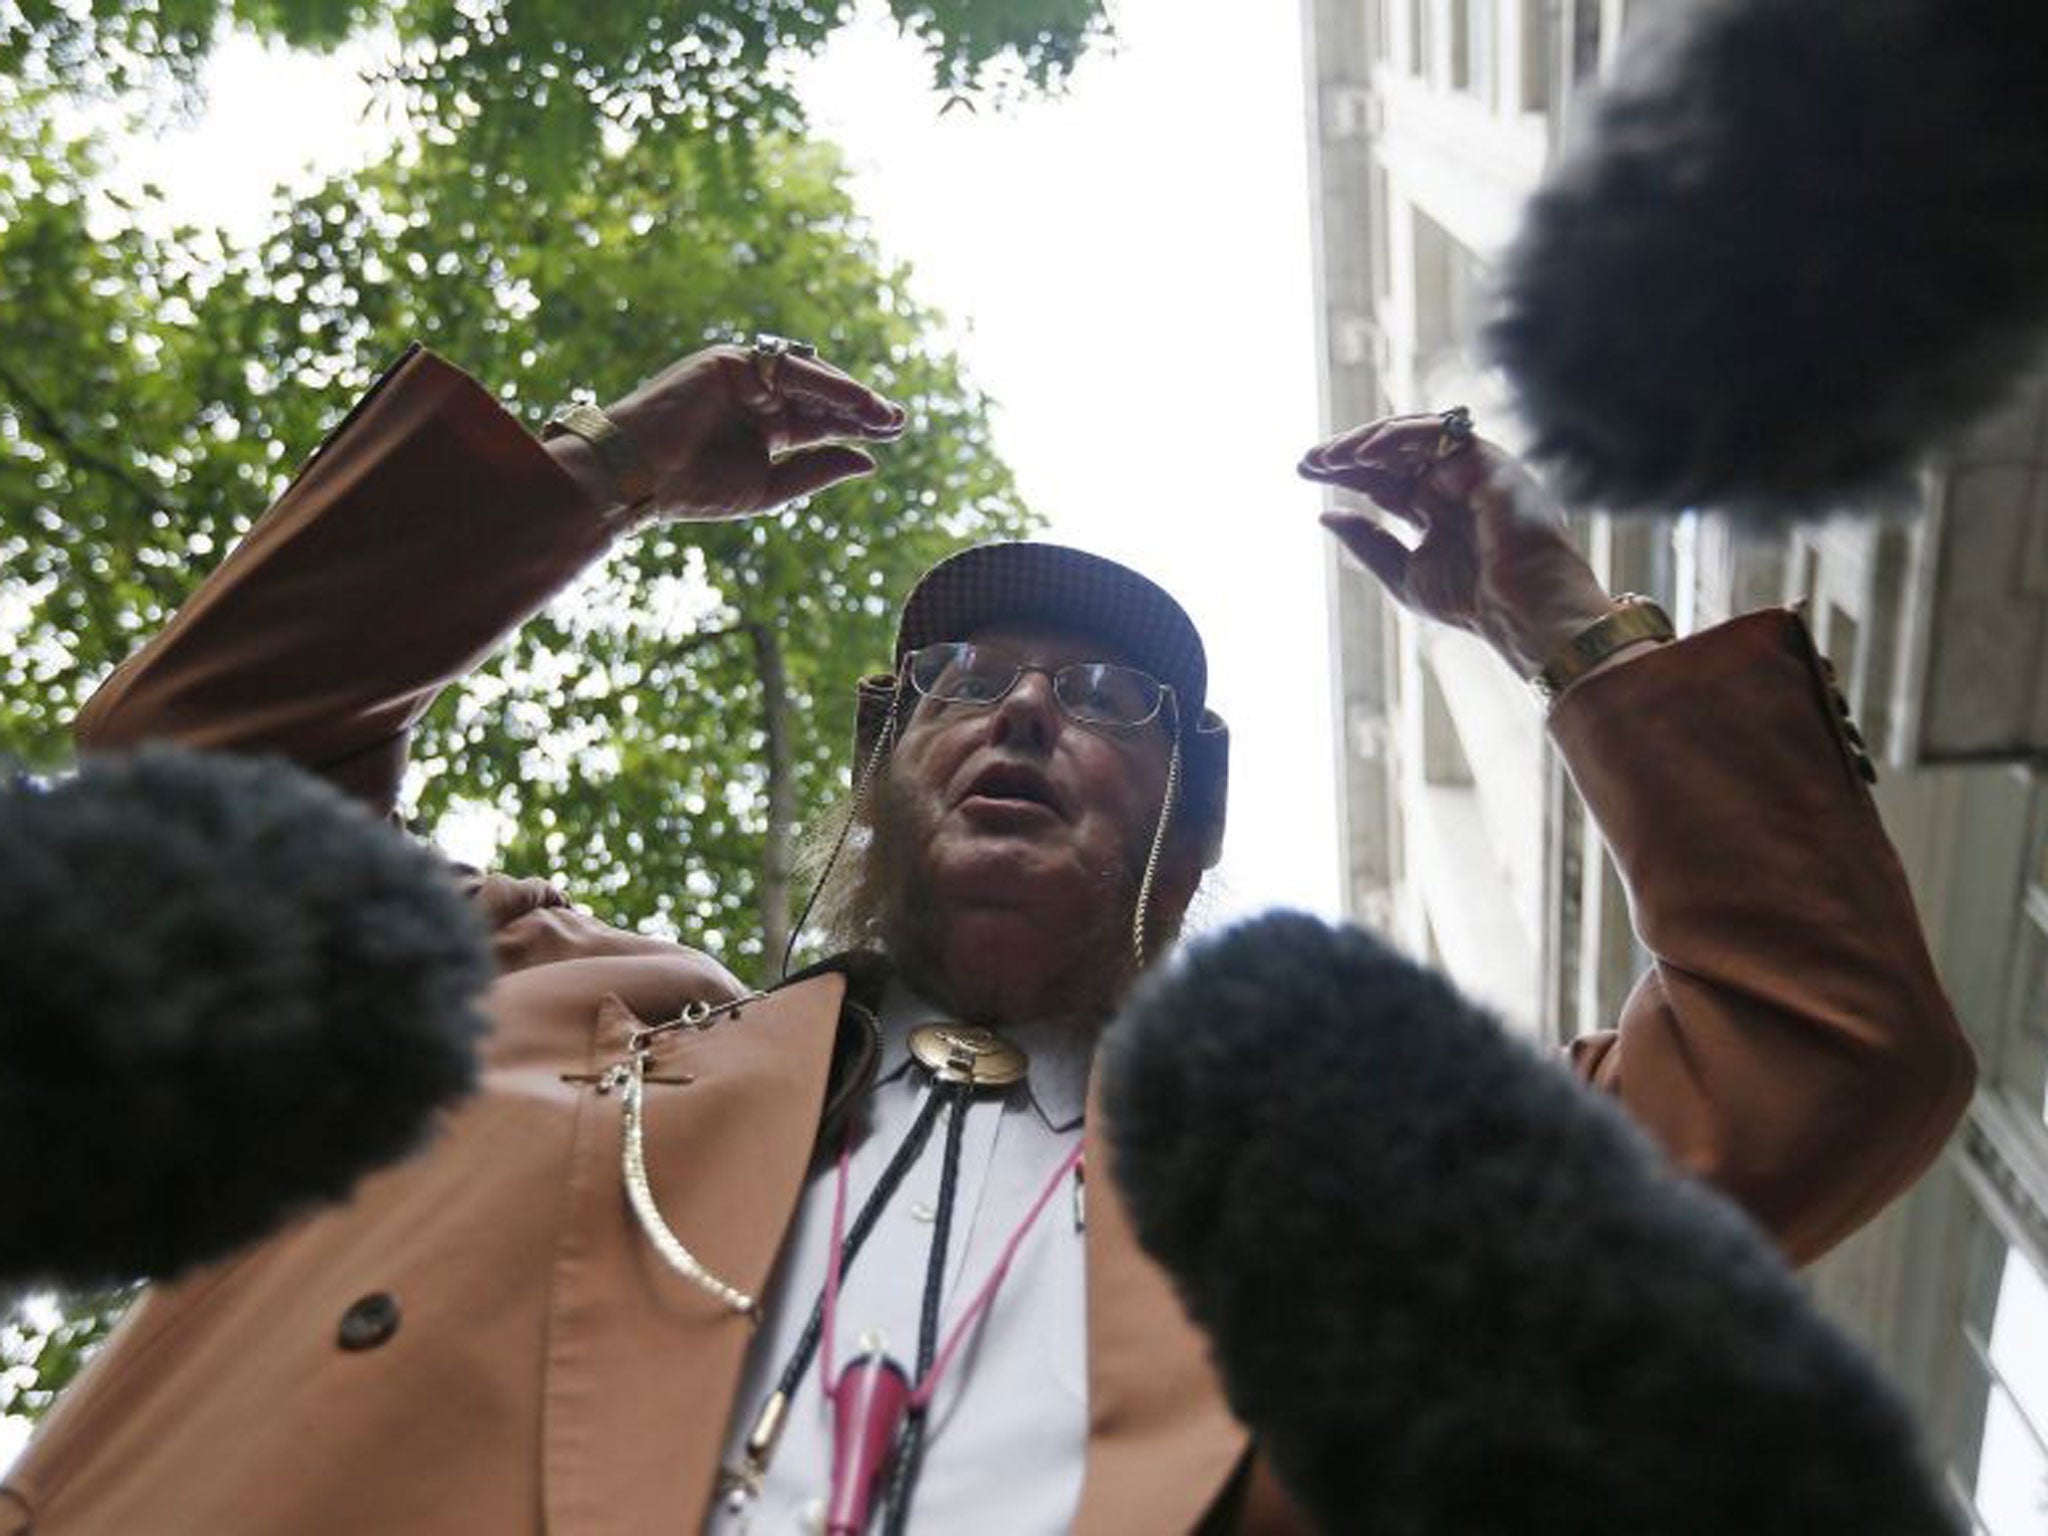 73-year-old broadcaster John McCririck has attracted more attention than usual for celebrity lawsuits